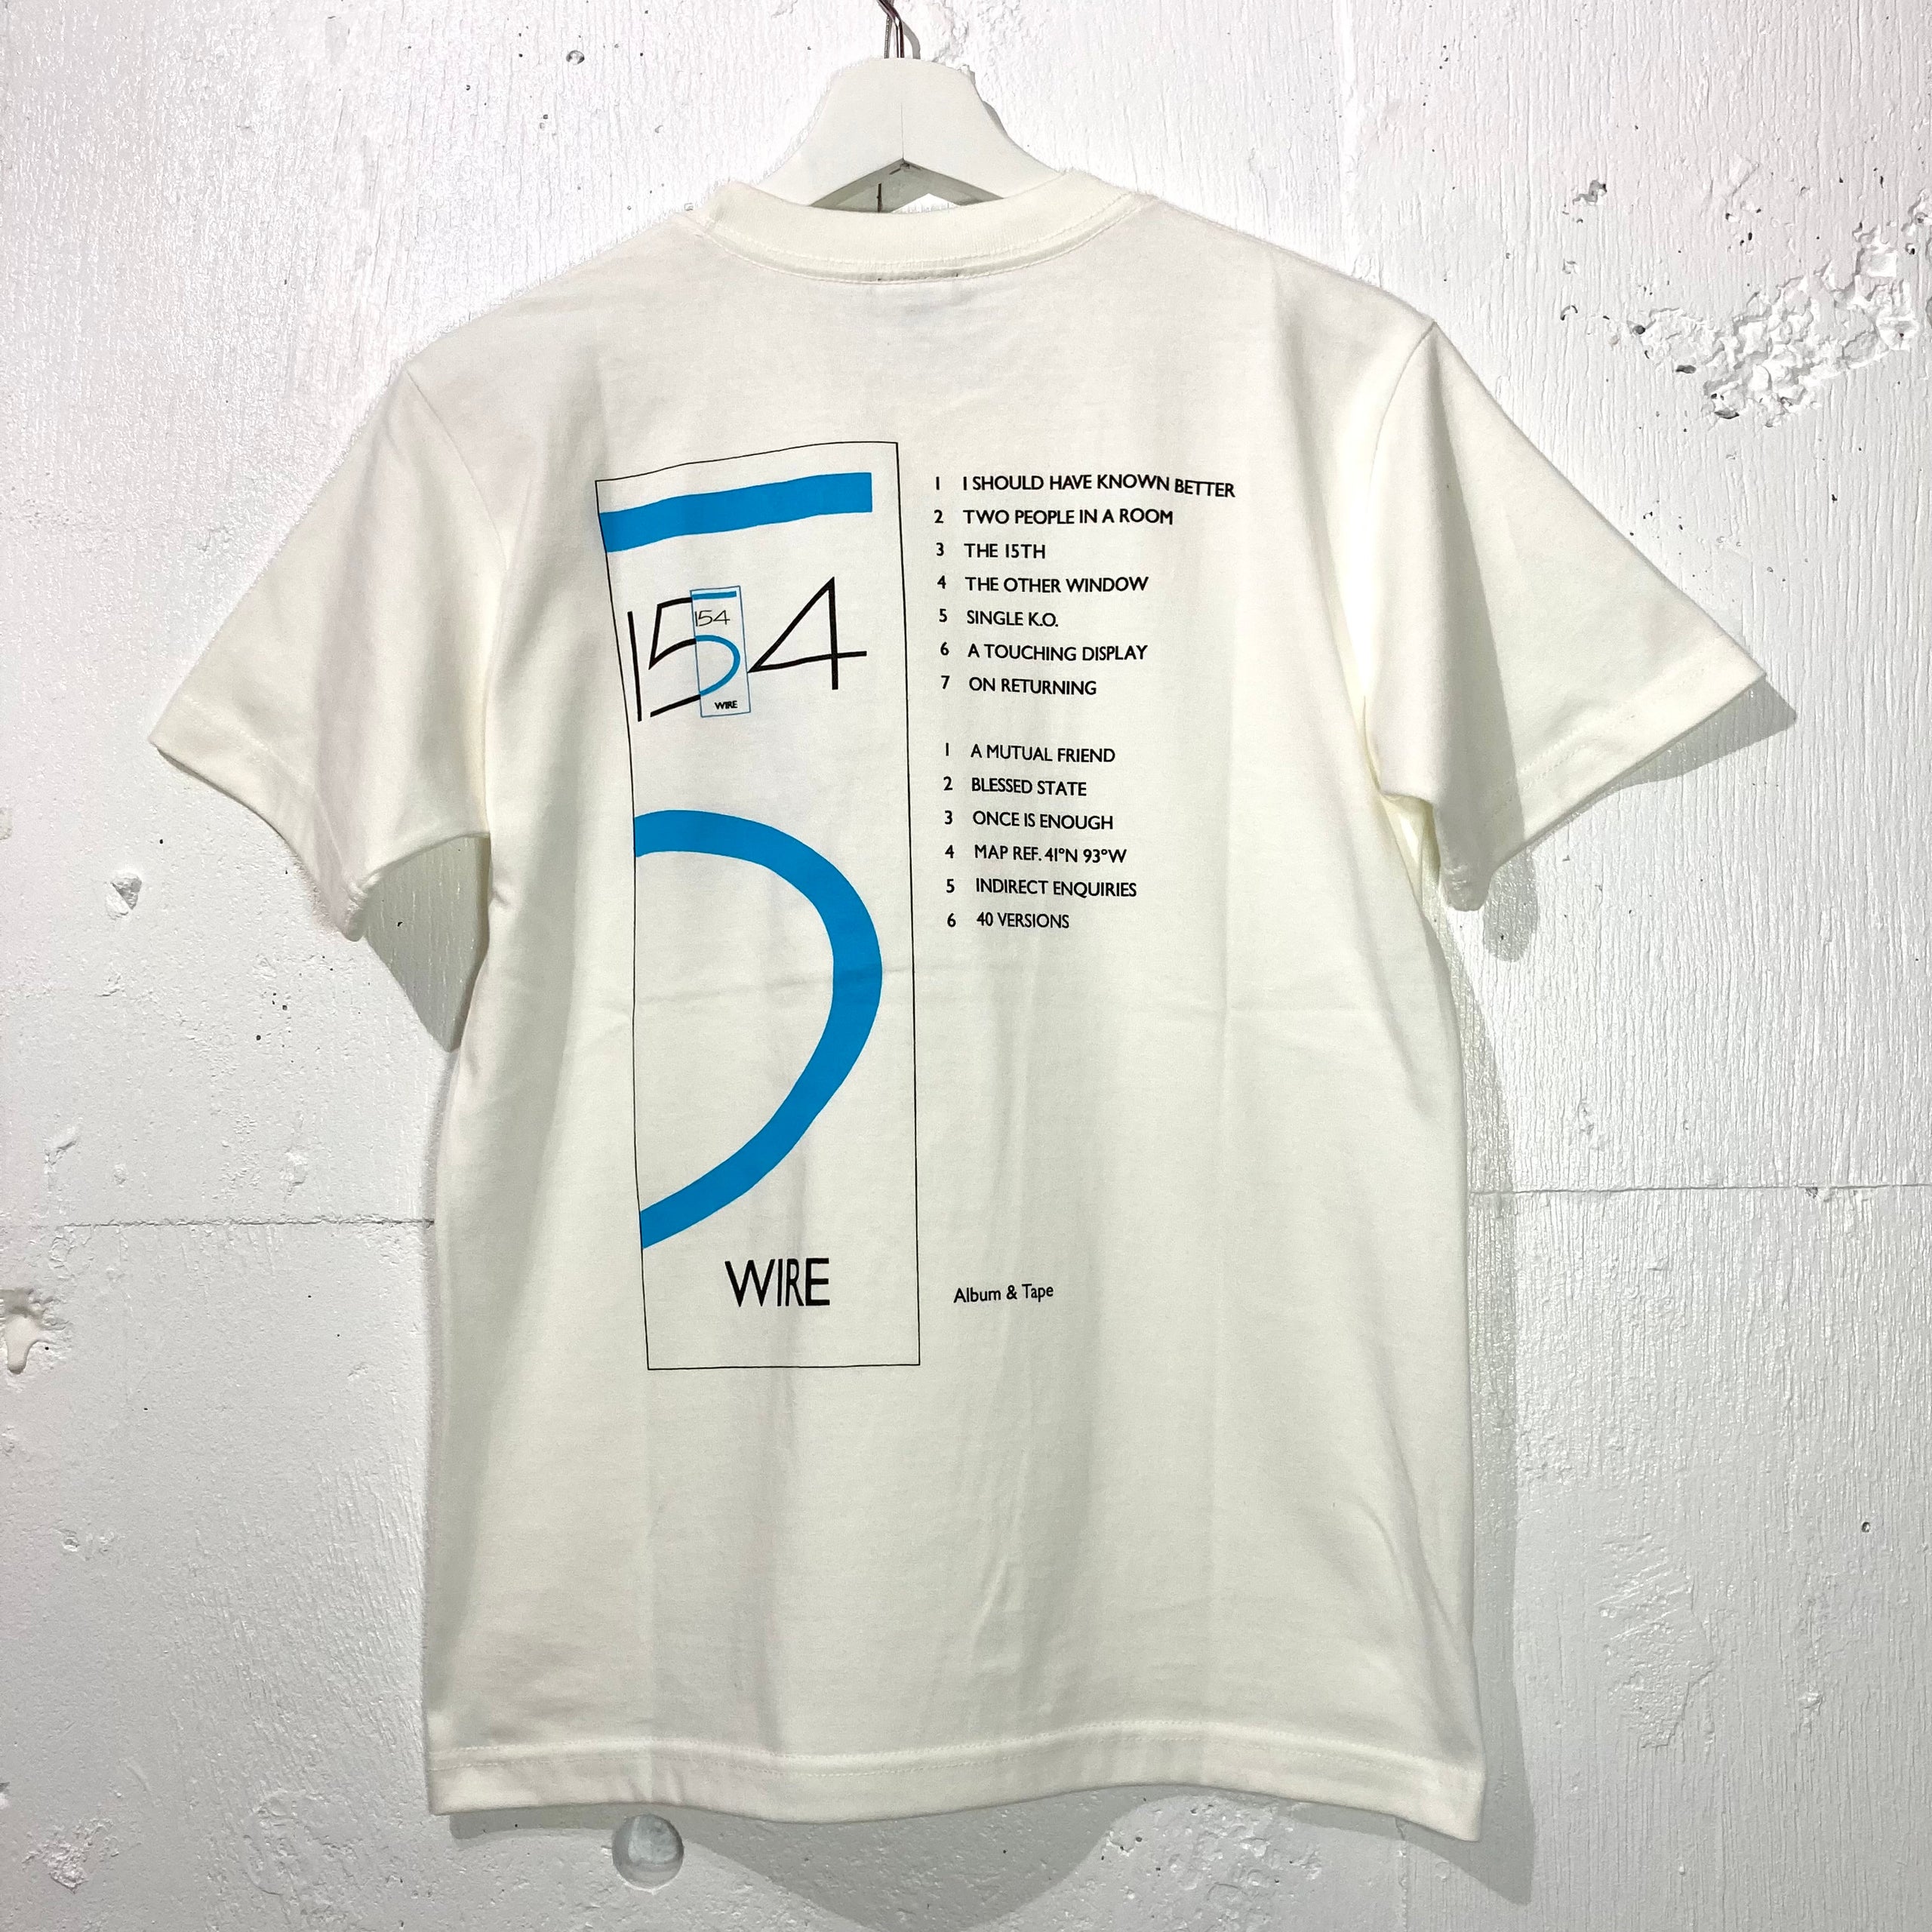 WIRE “154” Logo Embroidered T-shirt